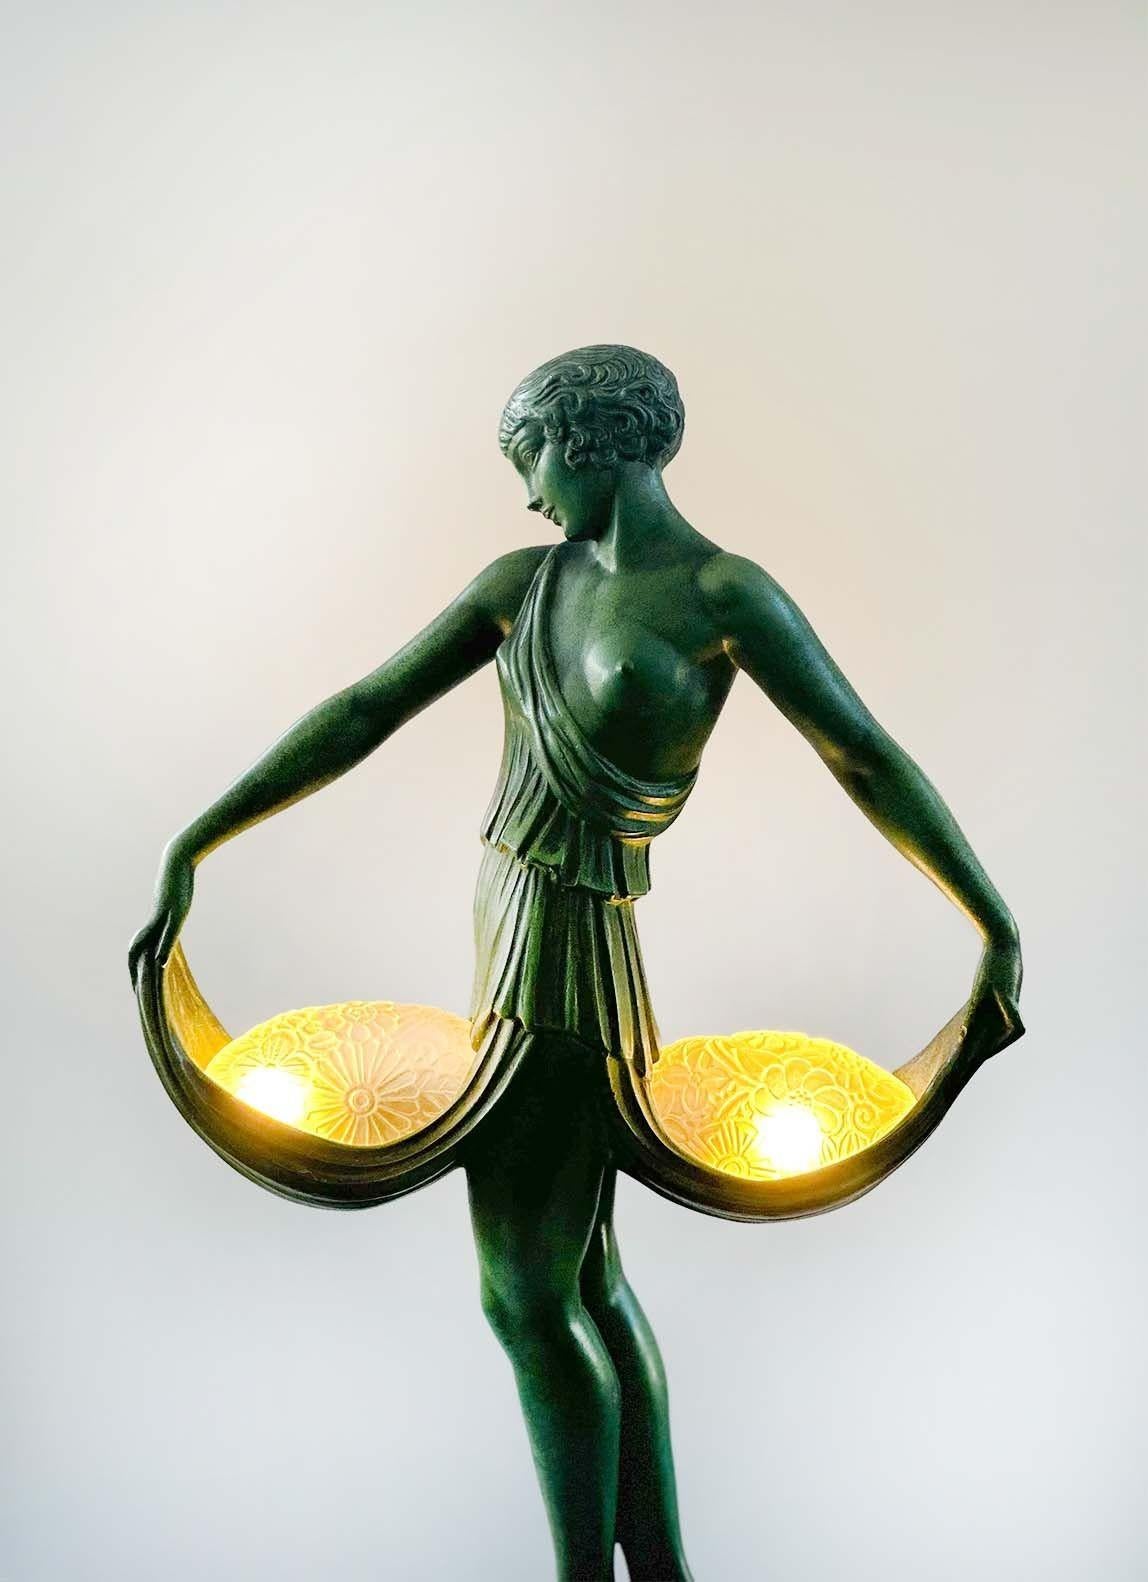 Beautiful Art Deco verdigris patinated metal sculptural table lamp by Pierre Le Faguays, France c. 1930. It depicts a female dancer standing on a marble base holding her attire gracefully which hold two molded glass shades with floral details.